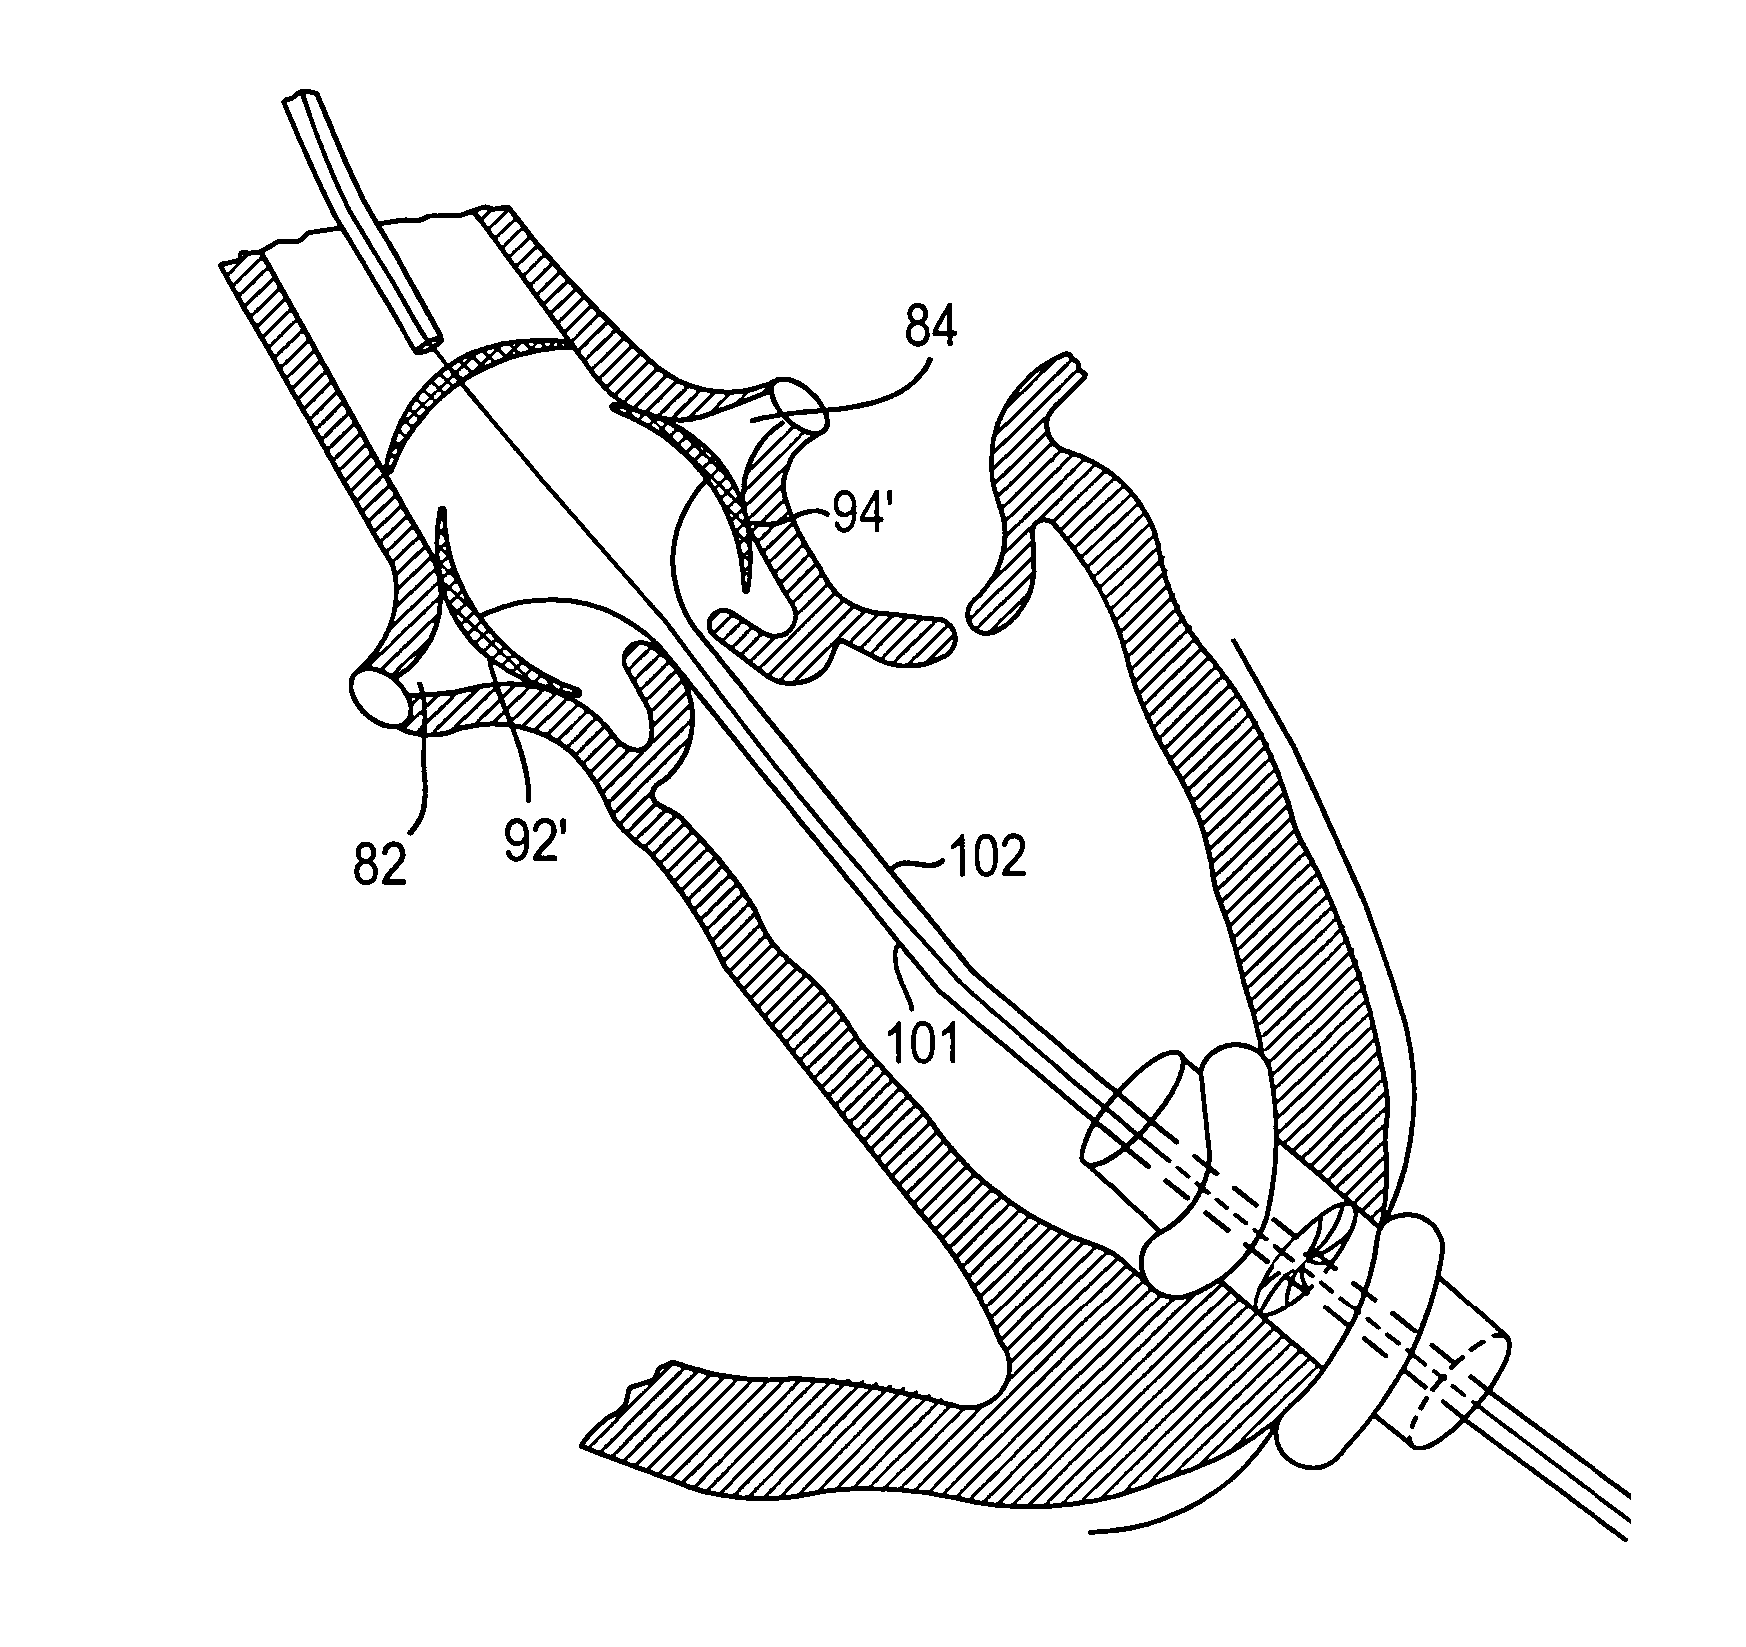 Methods and devices for repair or replacement of heart valves or adjacent tissue without the need for full cardiopulmonary support